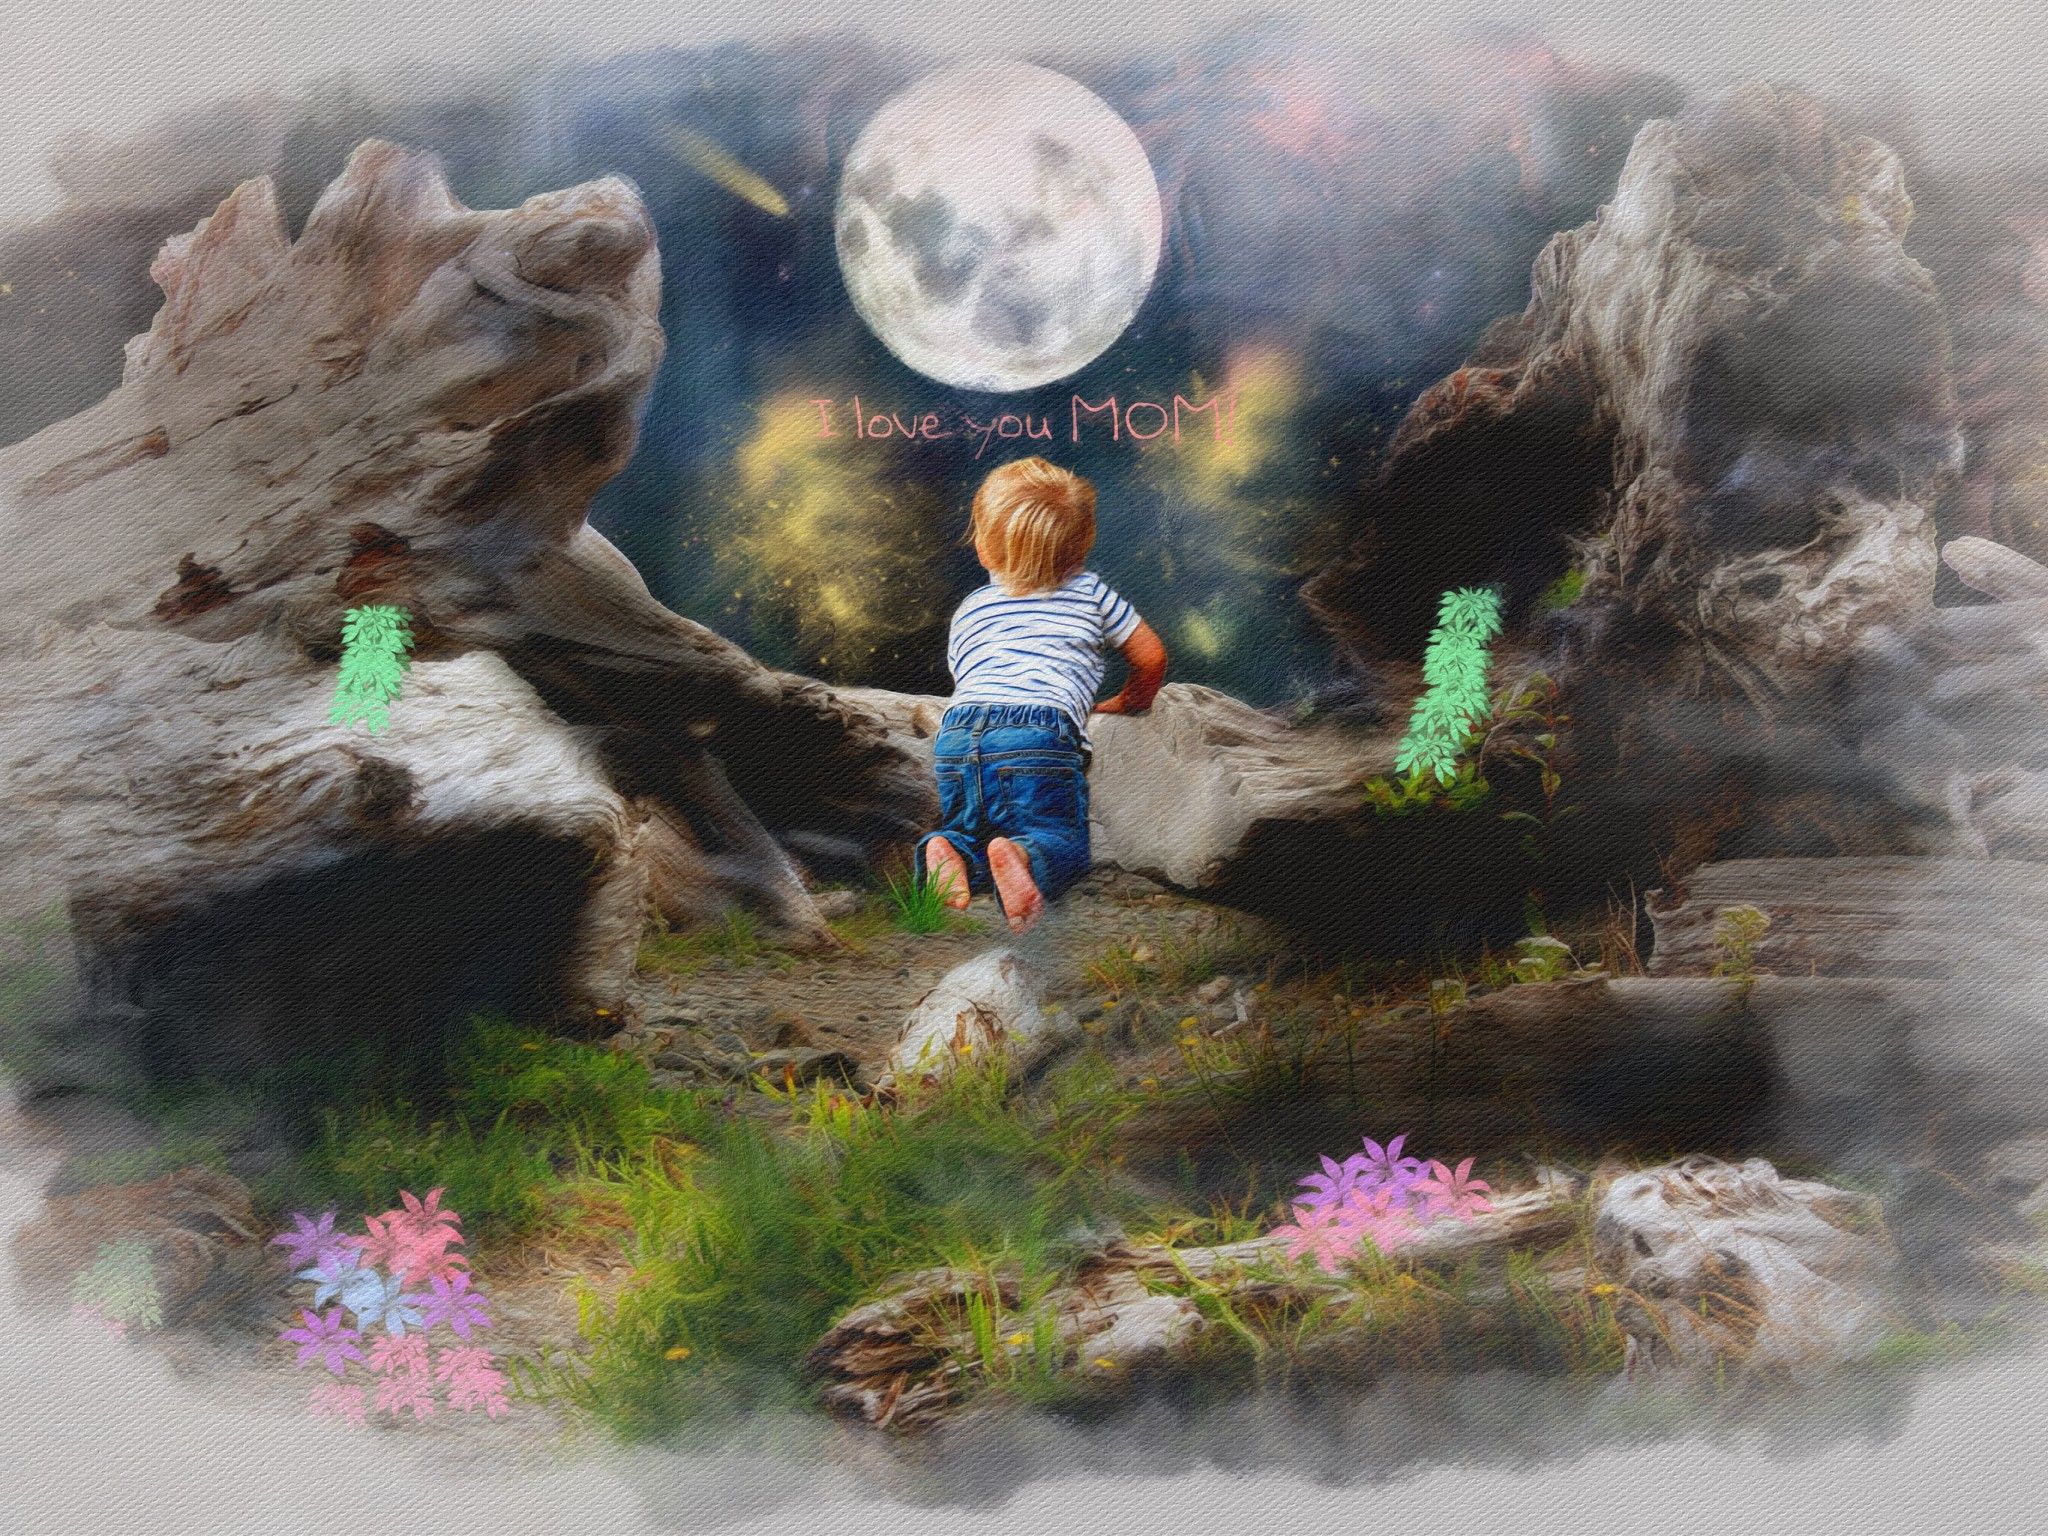 Wallpaper I Love You Mom, Kid, Boy, Moon, 4K, Love / Editor's Picks,. Wallpaper for iPhone, Android, Mobile and Desktop